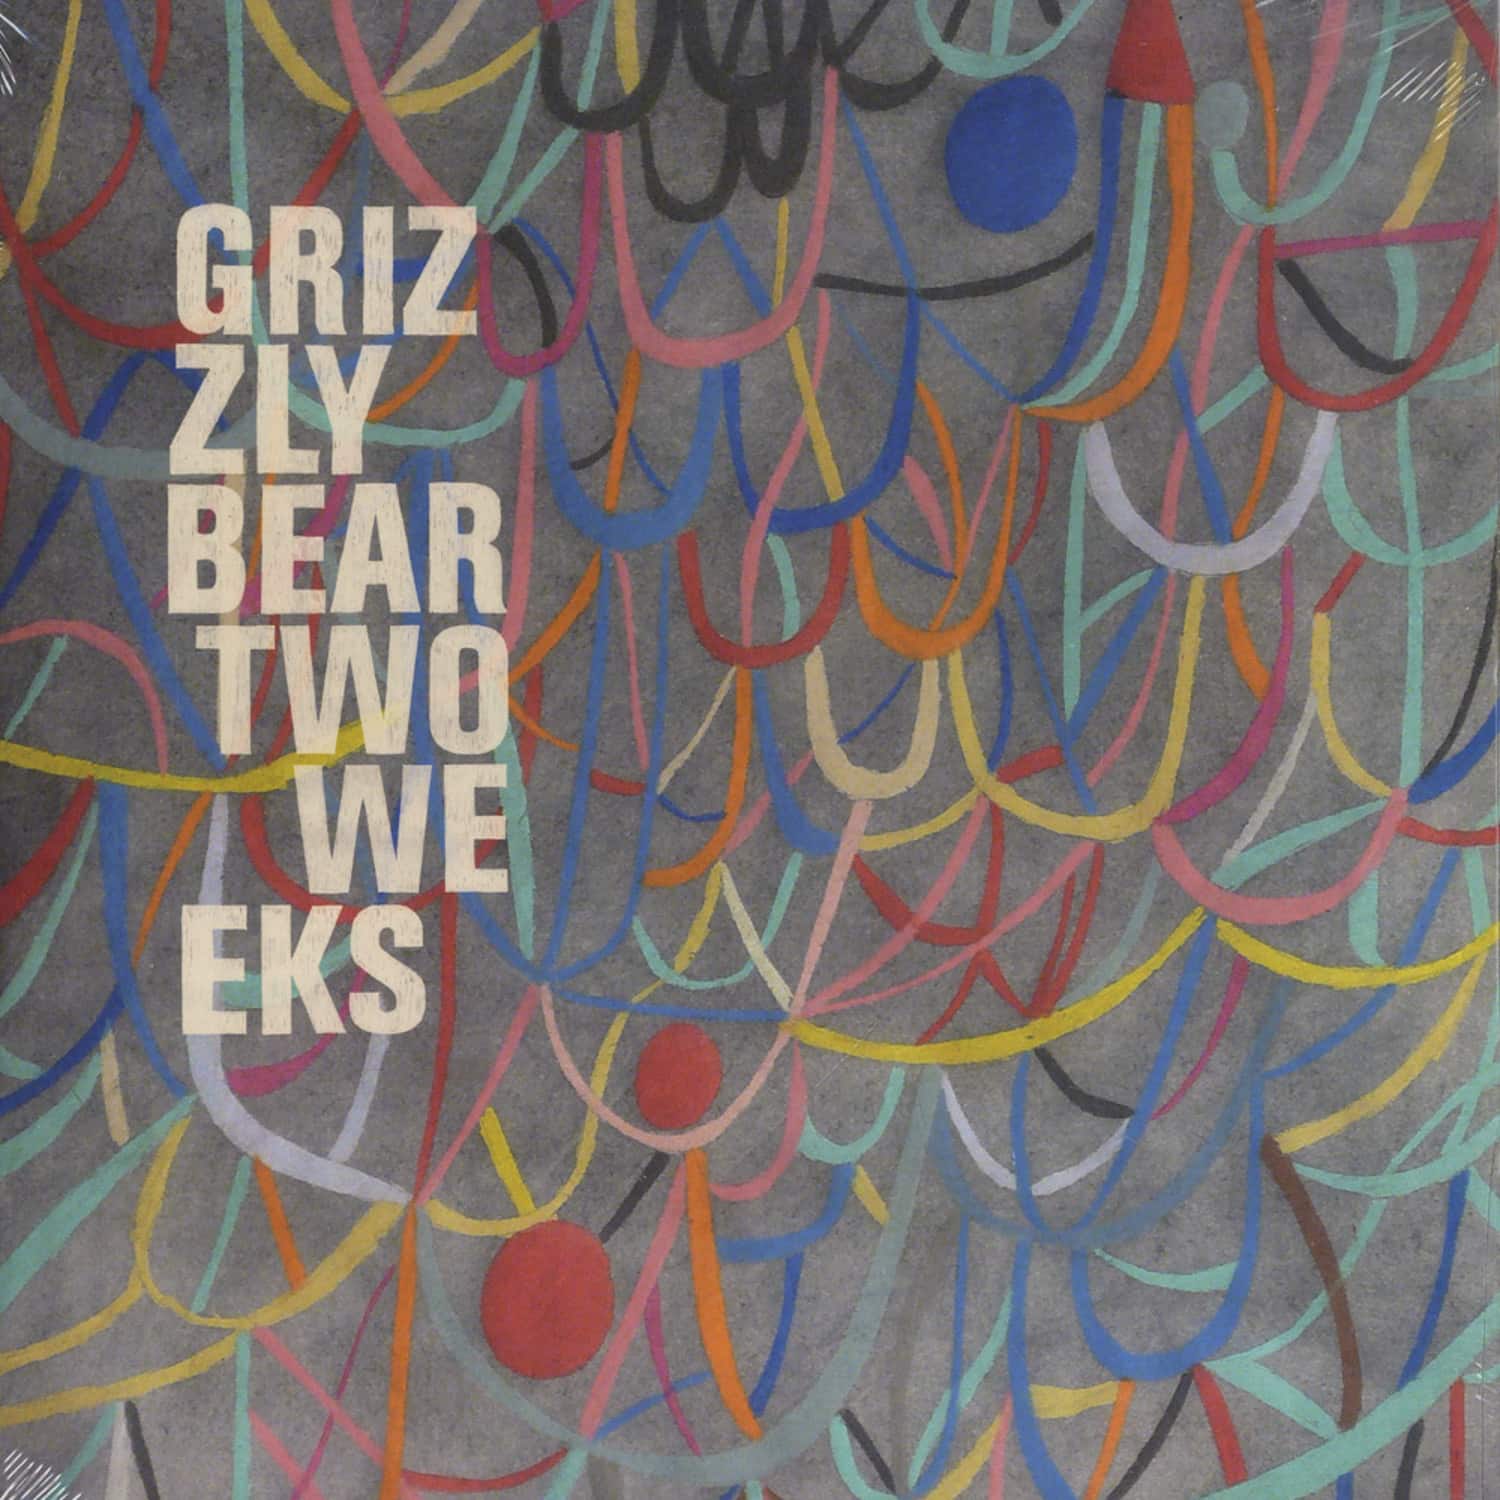 Grizzly Bear - TWO WEEKS